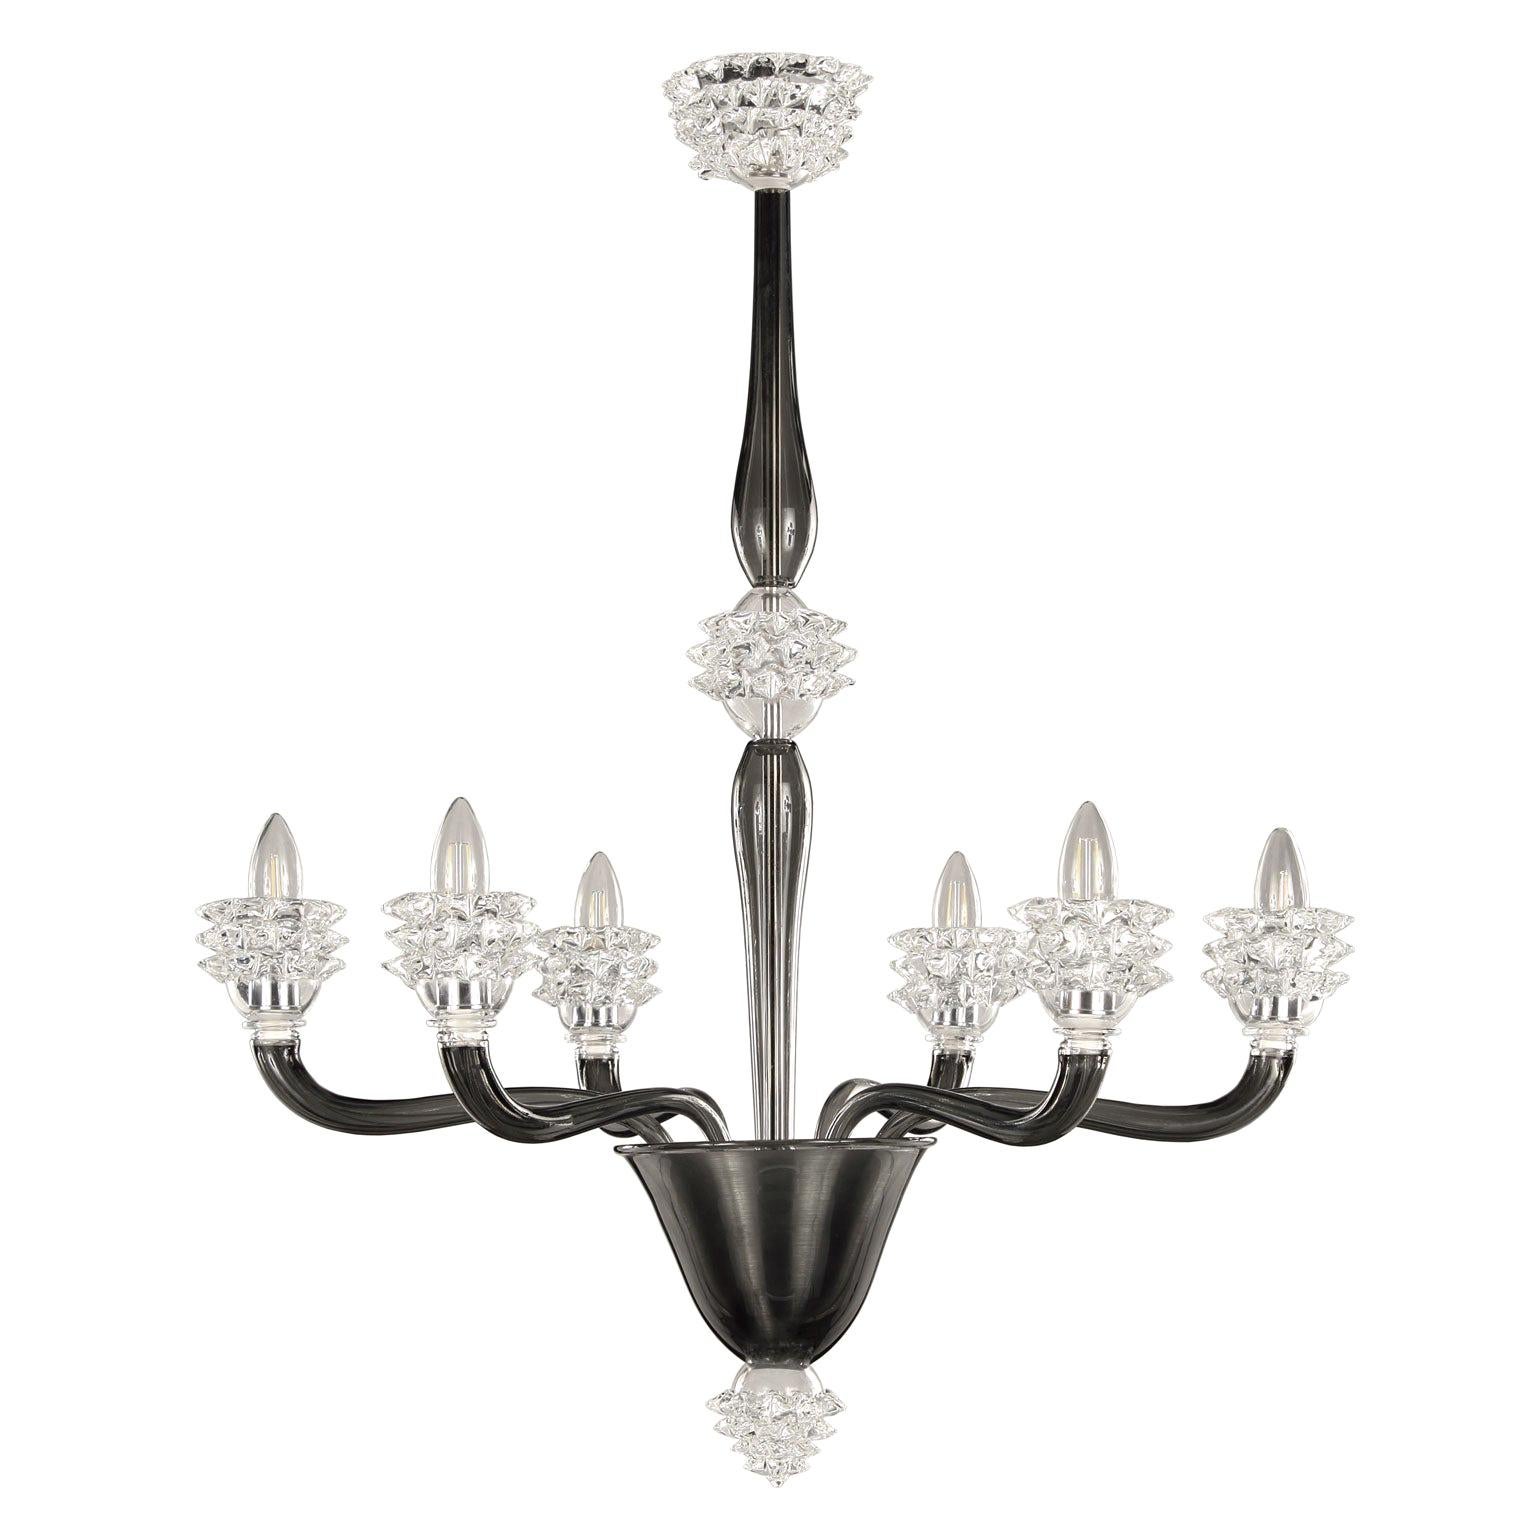 Italian Chandelier 6 arms Dark Grey and clear Rostri Murano Glass by Multiforme